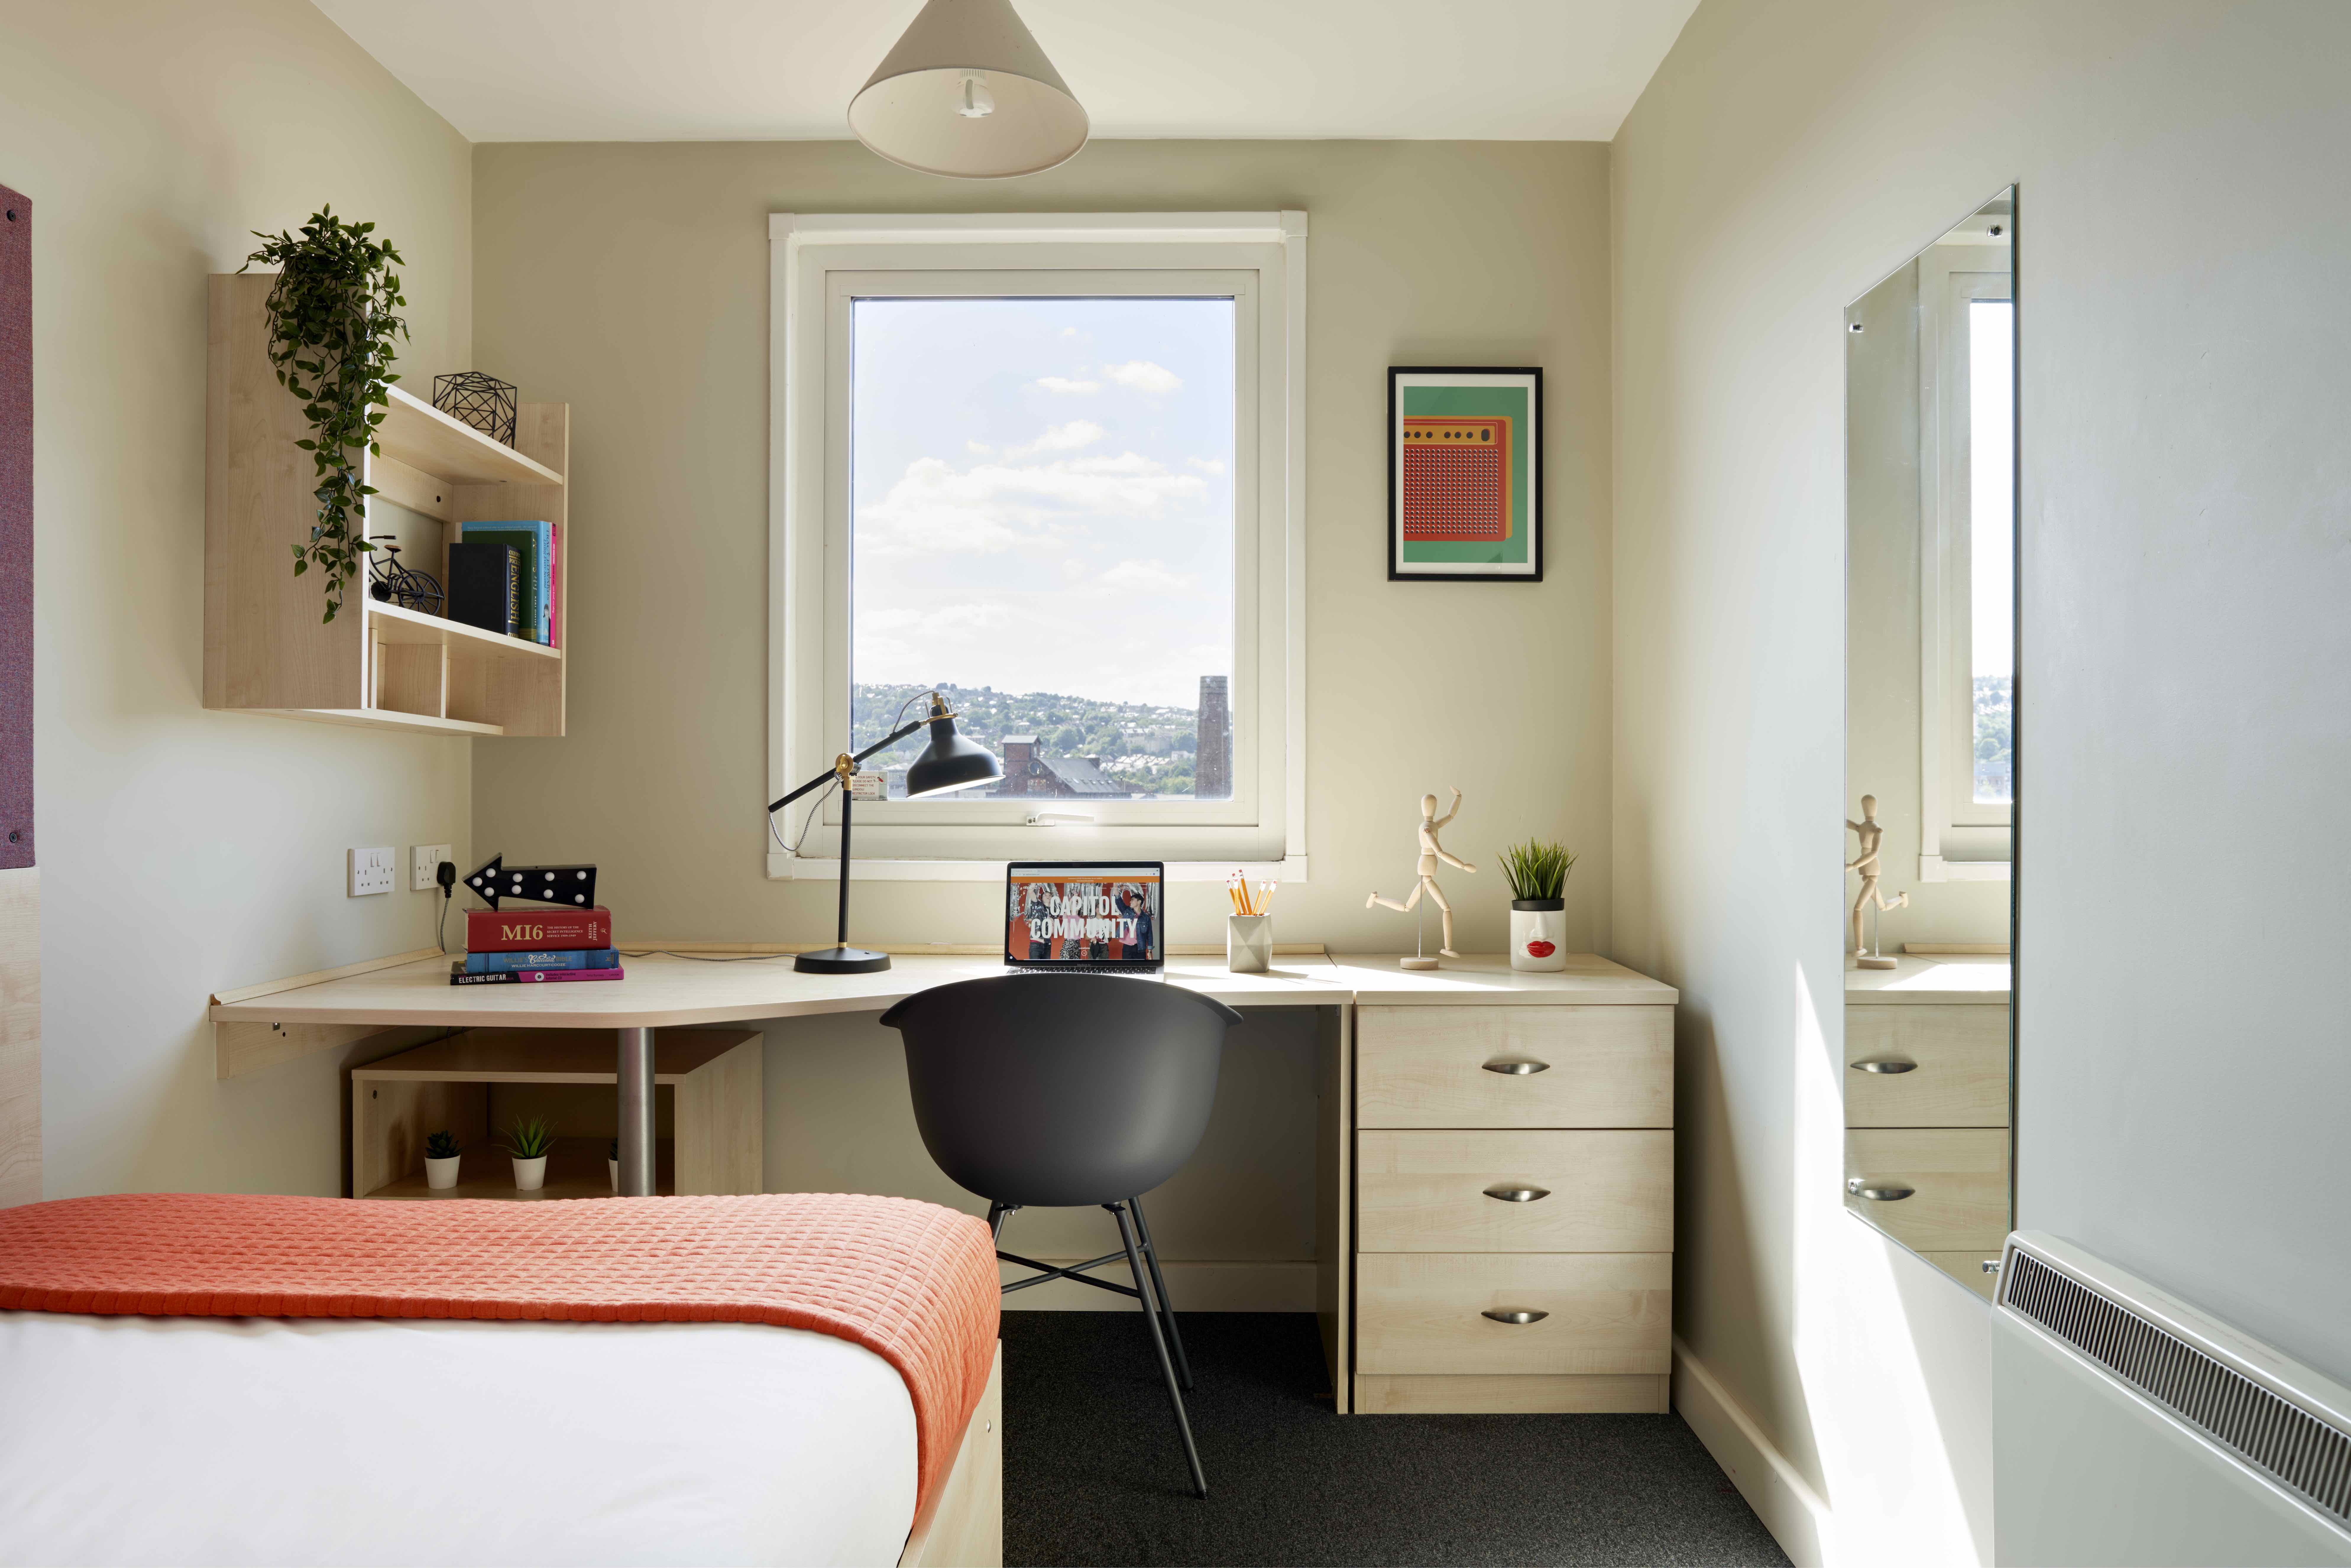 Sheffield student accommodation shared flat classic ensuite